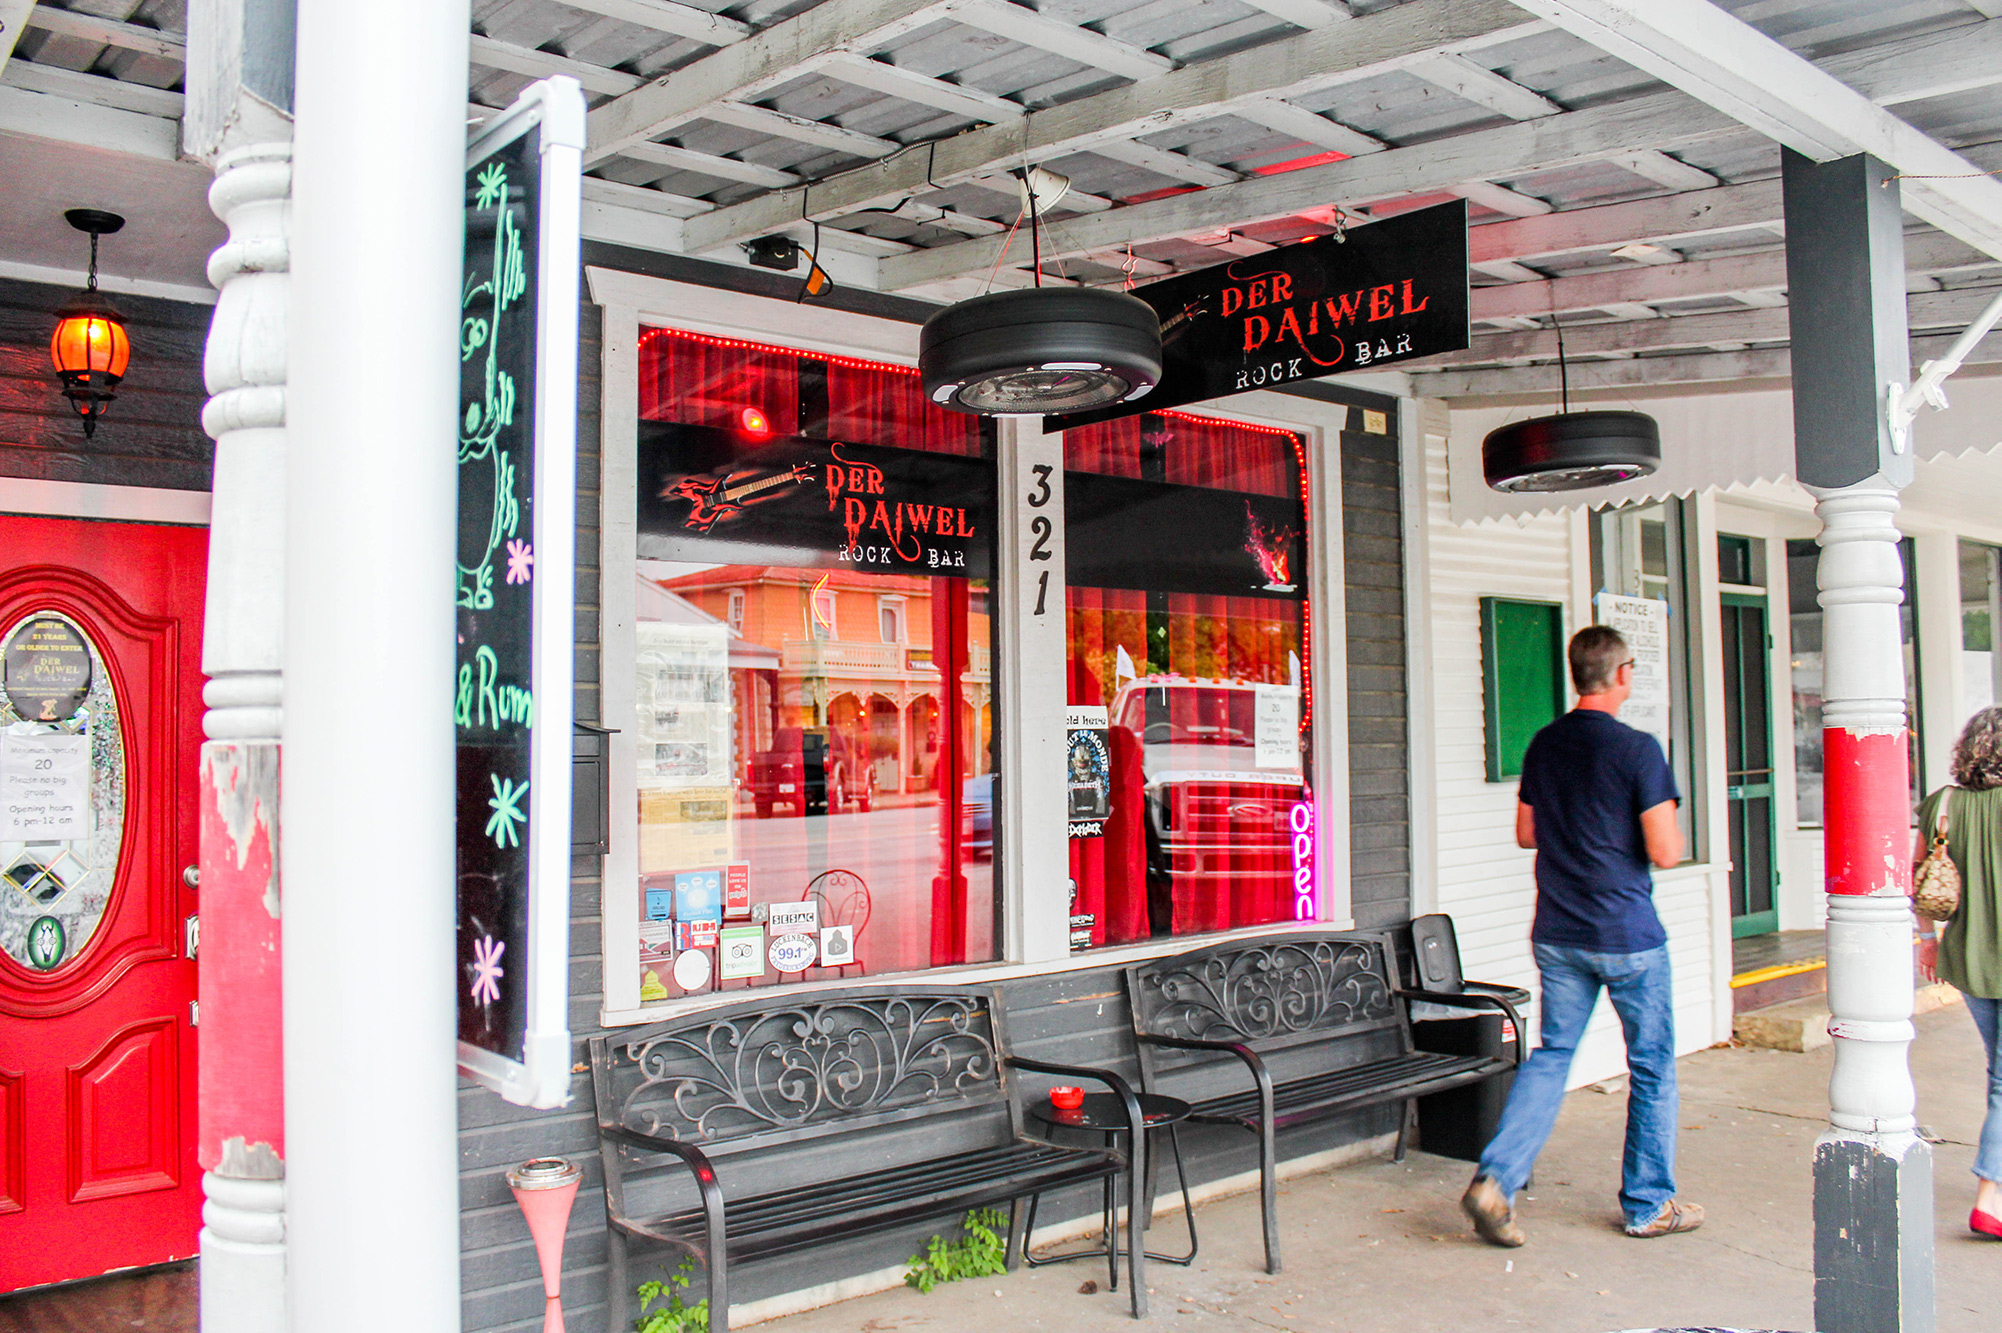 Der Daiwel's red and black storefront contrasts with Fredericksburg's white Main Street building